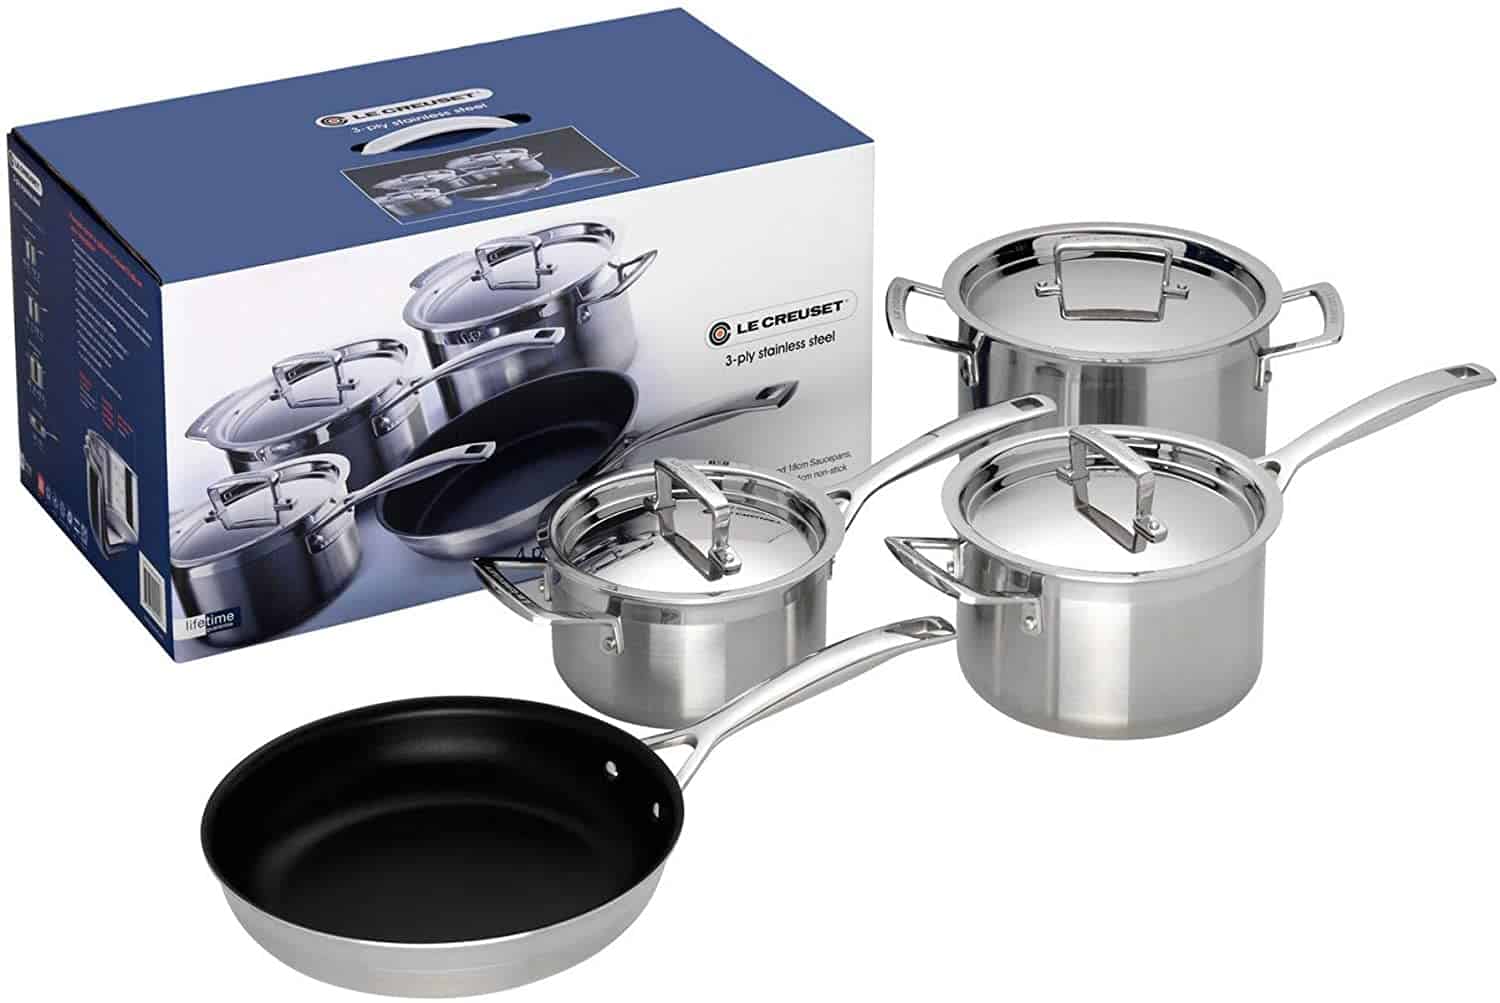 Le Creuset 3-Ply Stainless Steel Saucepan Set